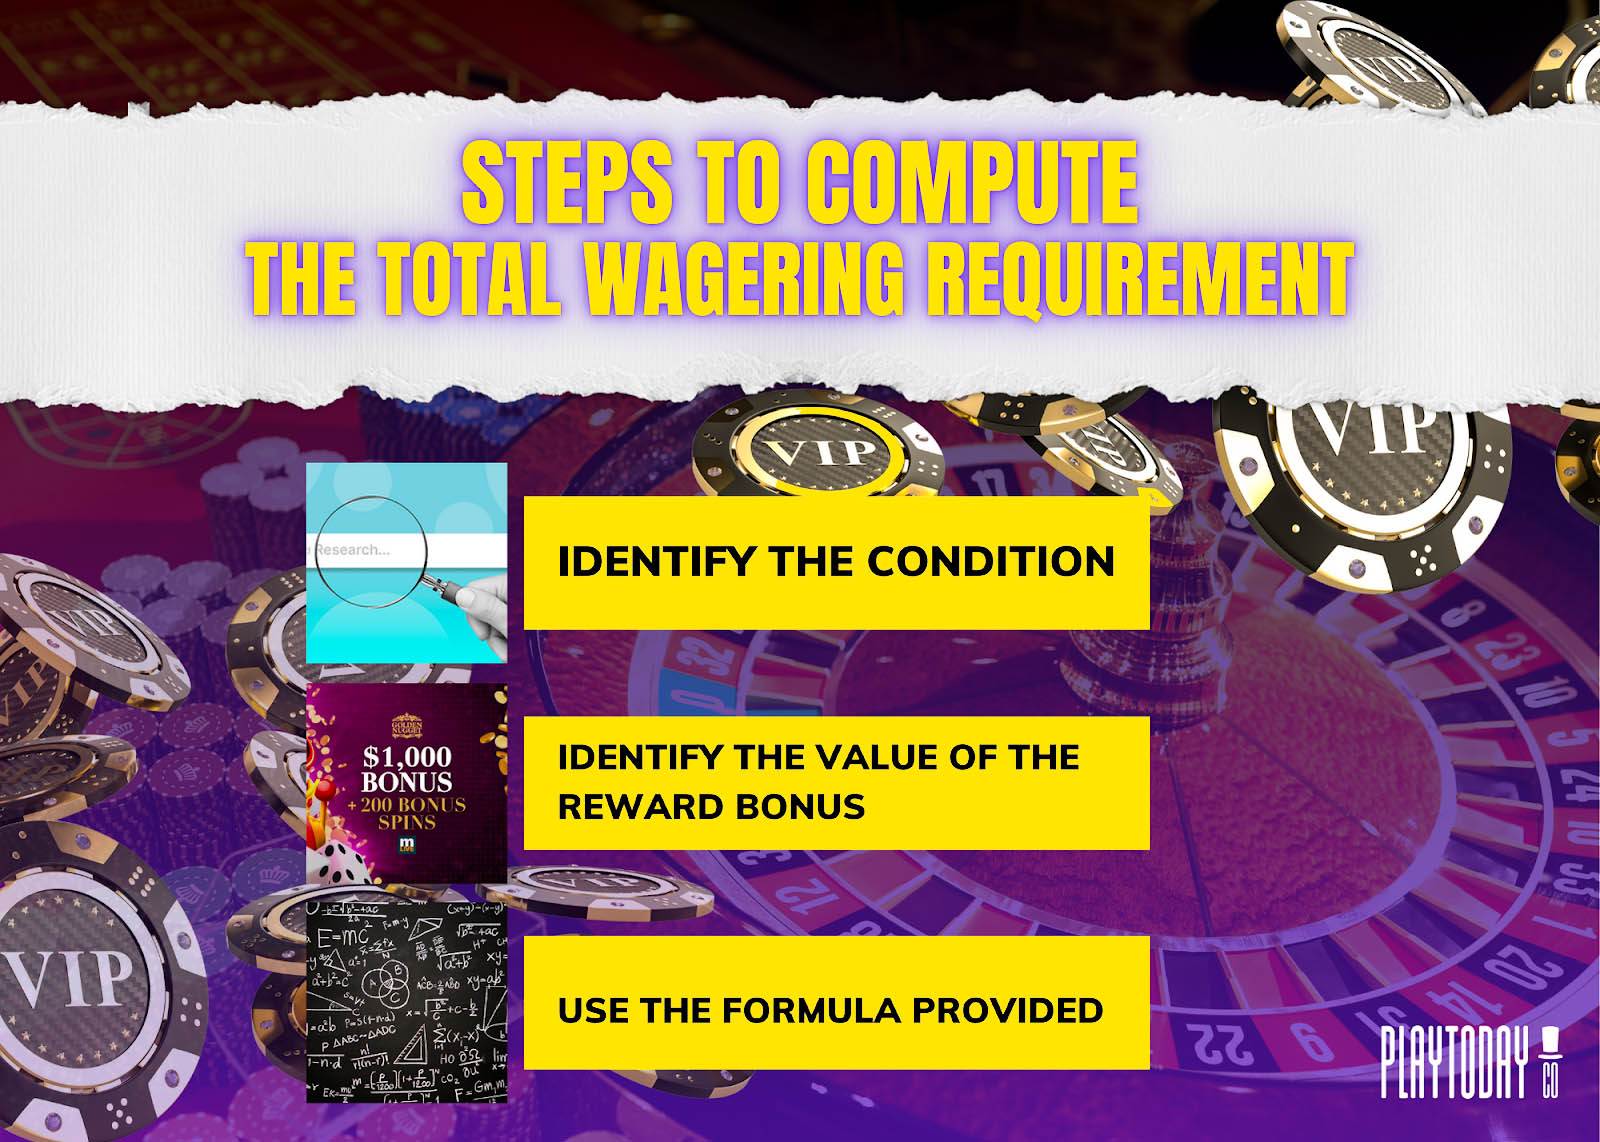 Steps to Calculate the Total Wagering Requirement